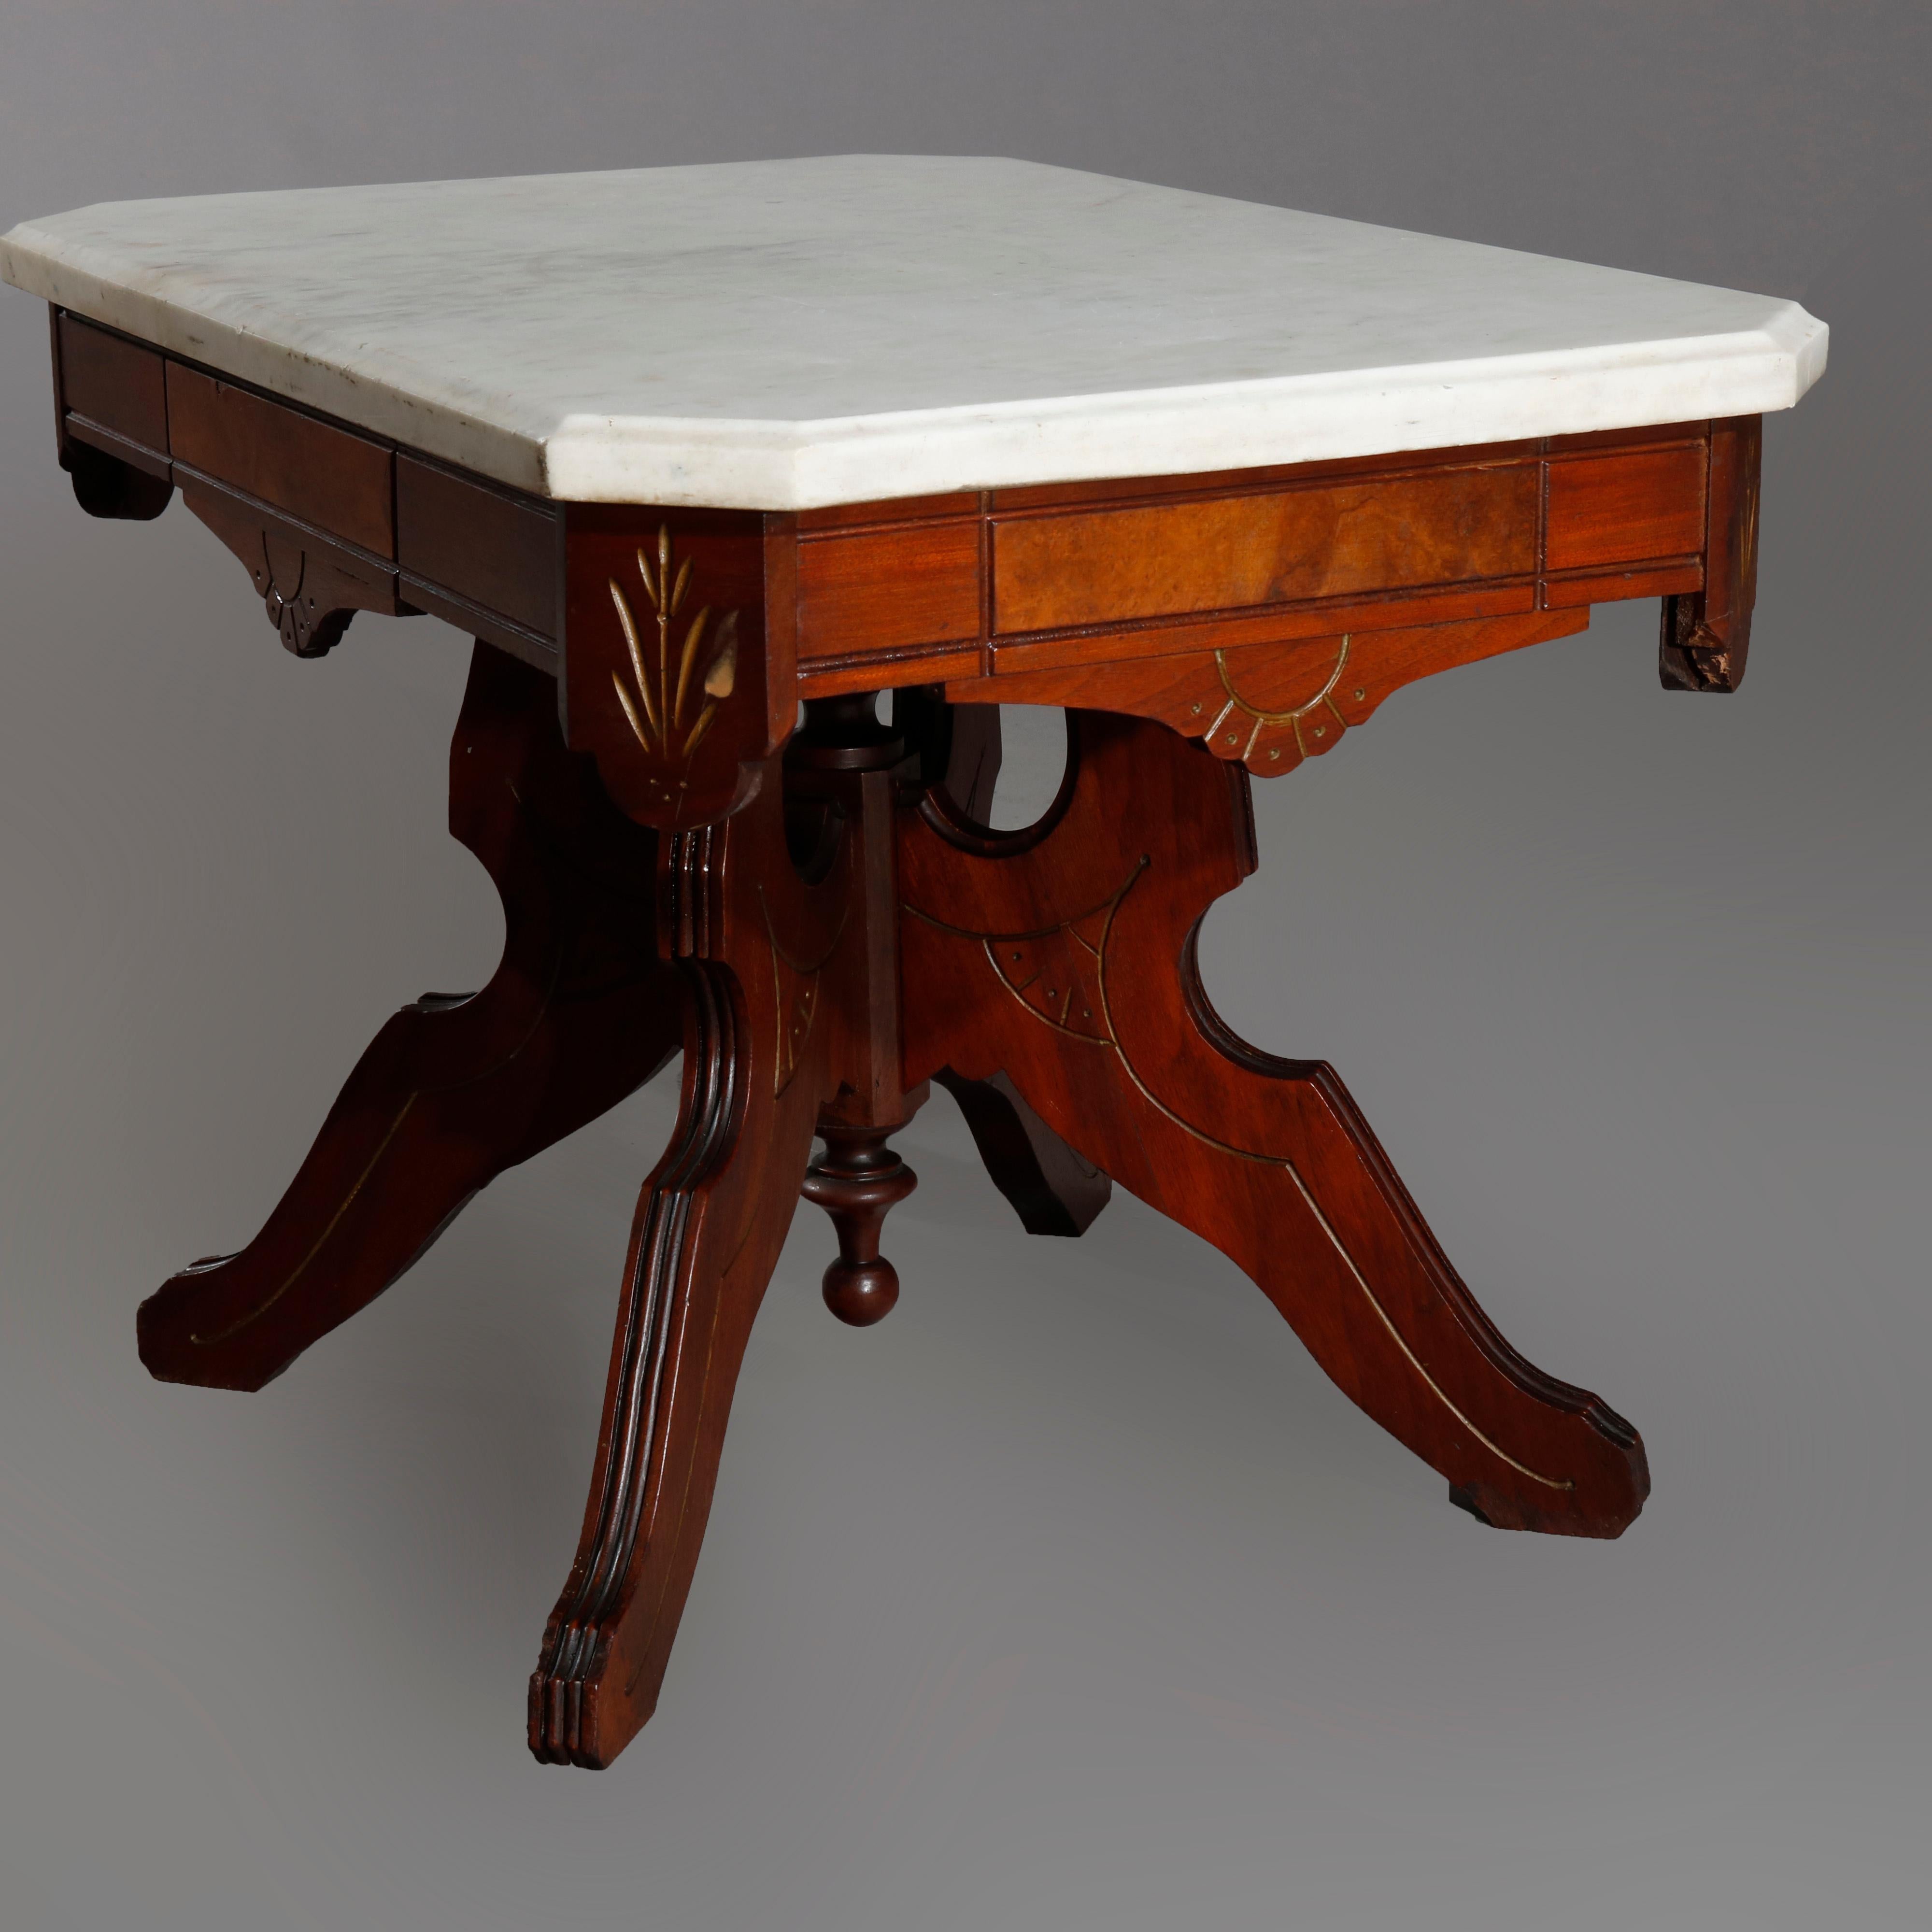 An antique Eastlake low center table offers beveled clip corner top surmounting walnut base with carved shaped skirt having burl insets and incised sunburst raised on shaped legs with central drop finial, circa 1890

Measures: 18.5